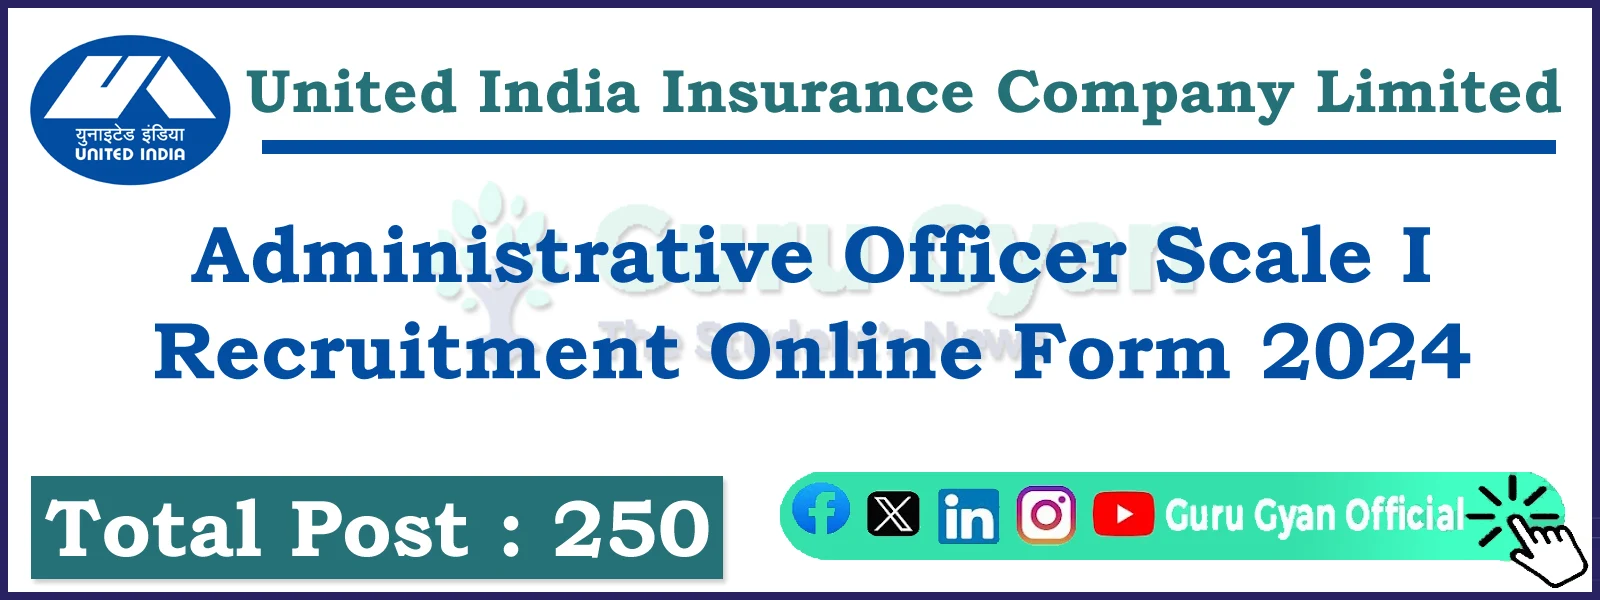 UIIC Administrative Officer Scale I Online Form 2024